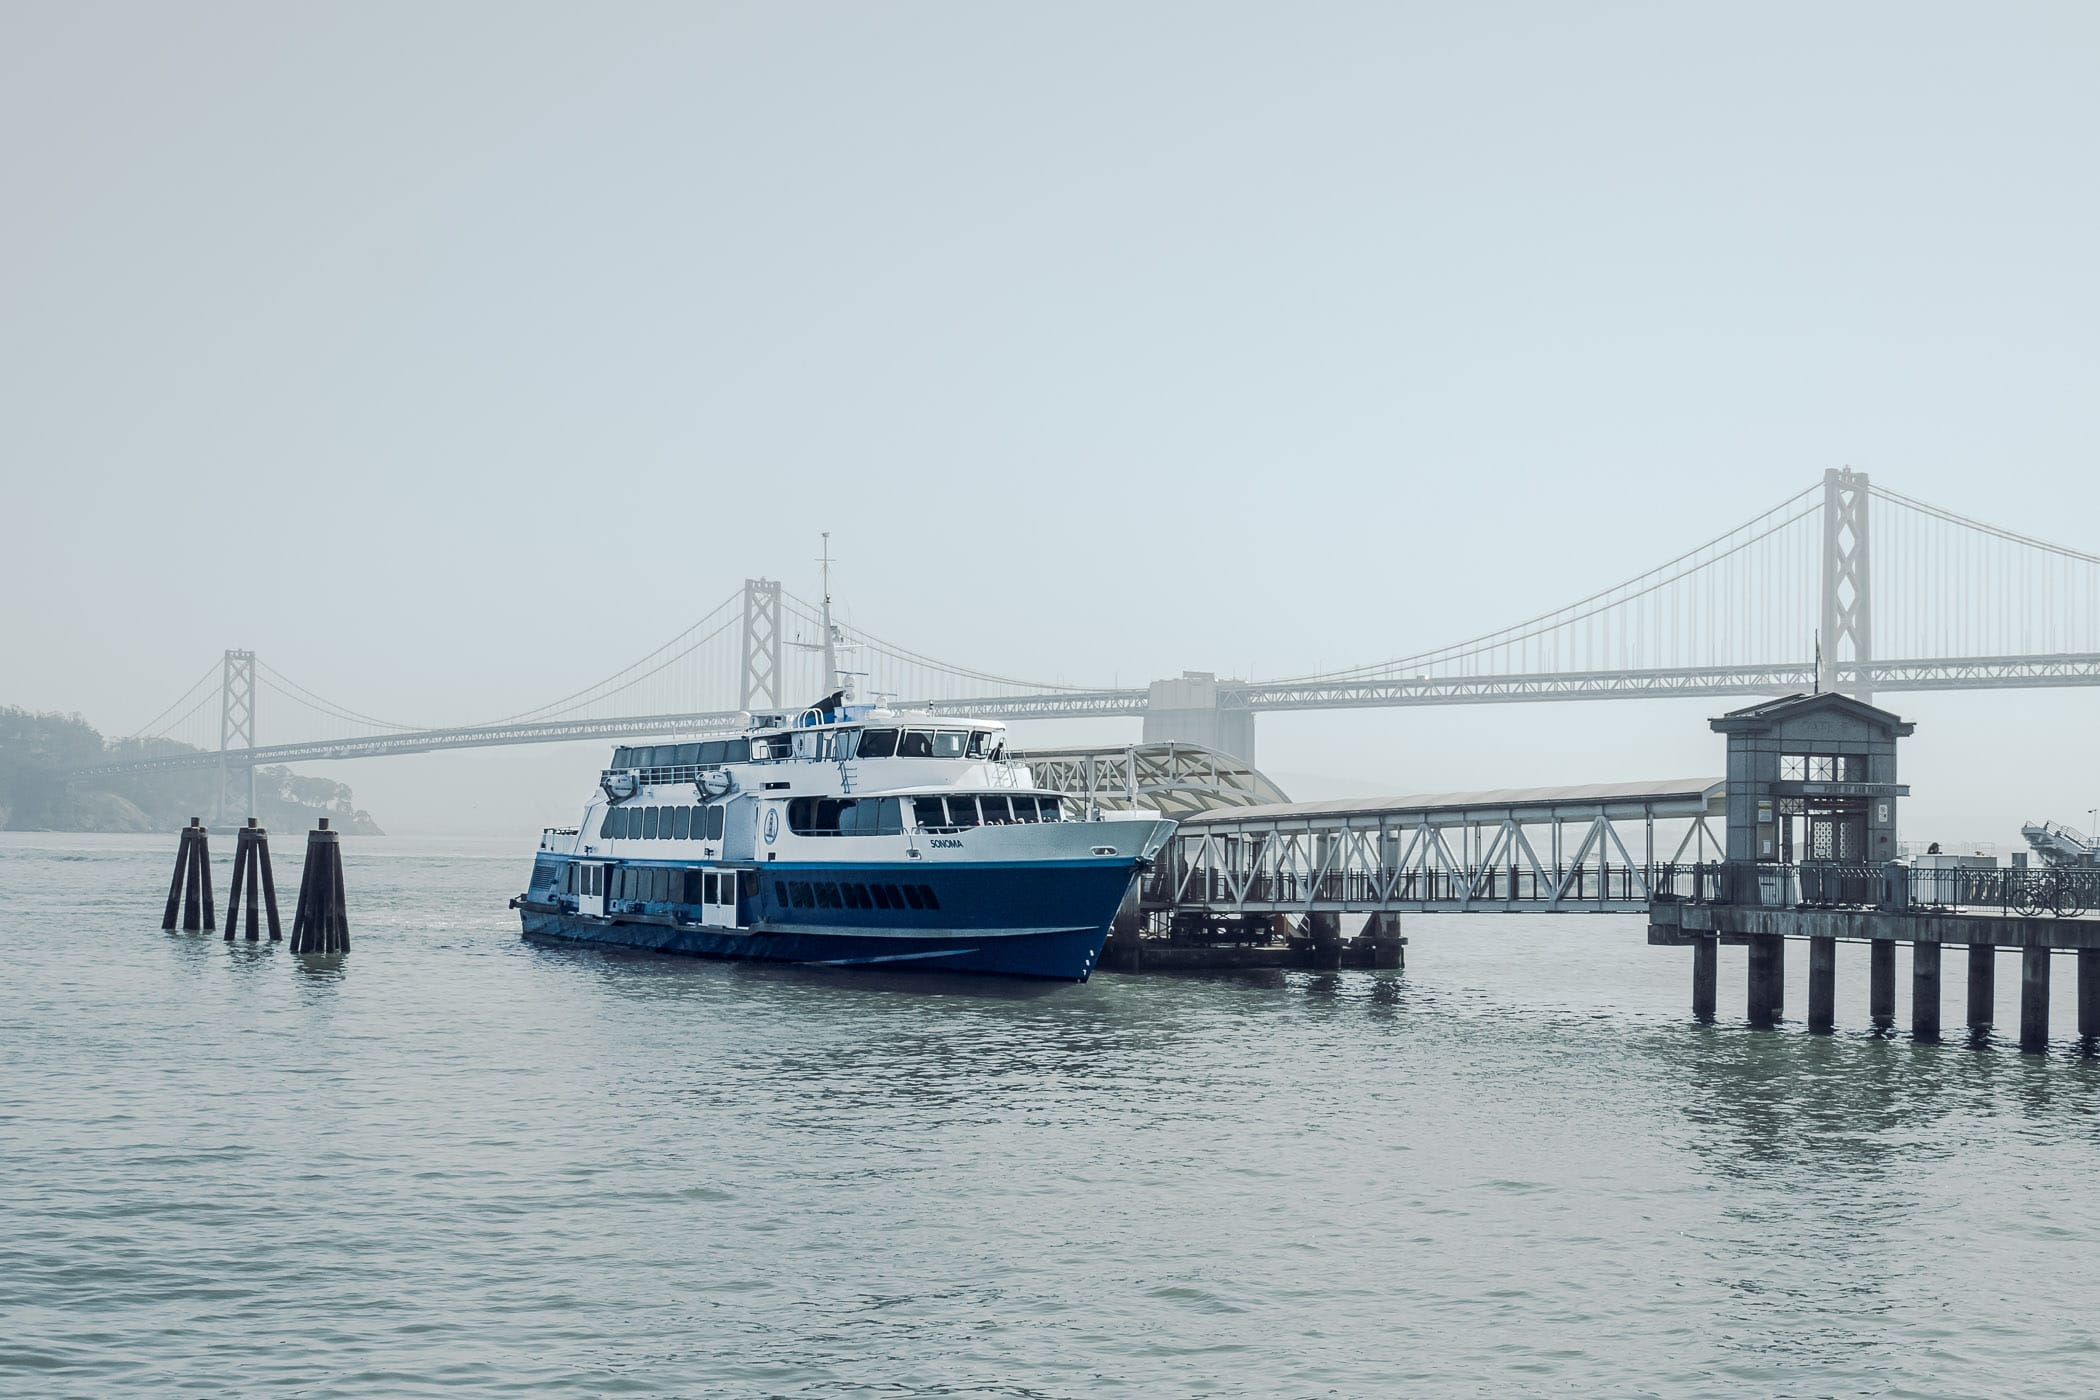 The Golden Gate Ferries' Sonoma waits at the San Francisco Ferry Building to take aboard passengers.